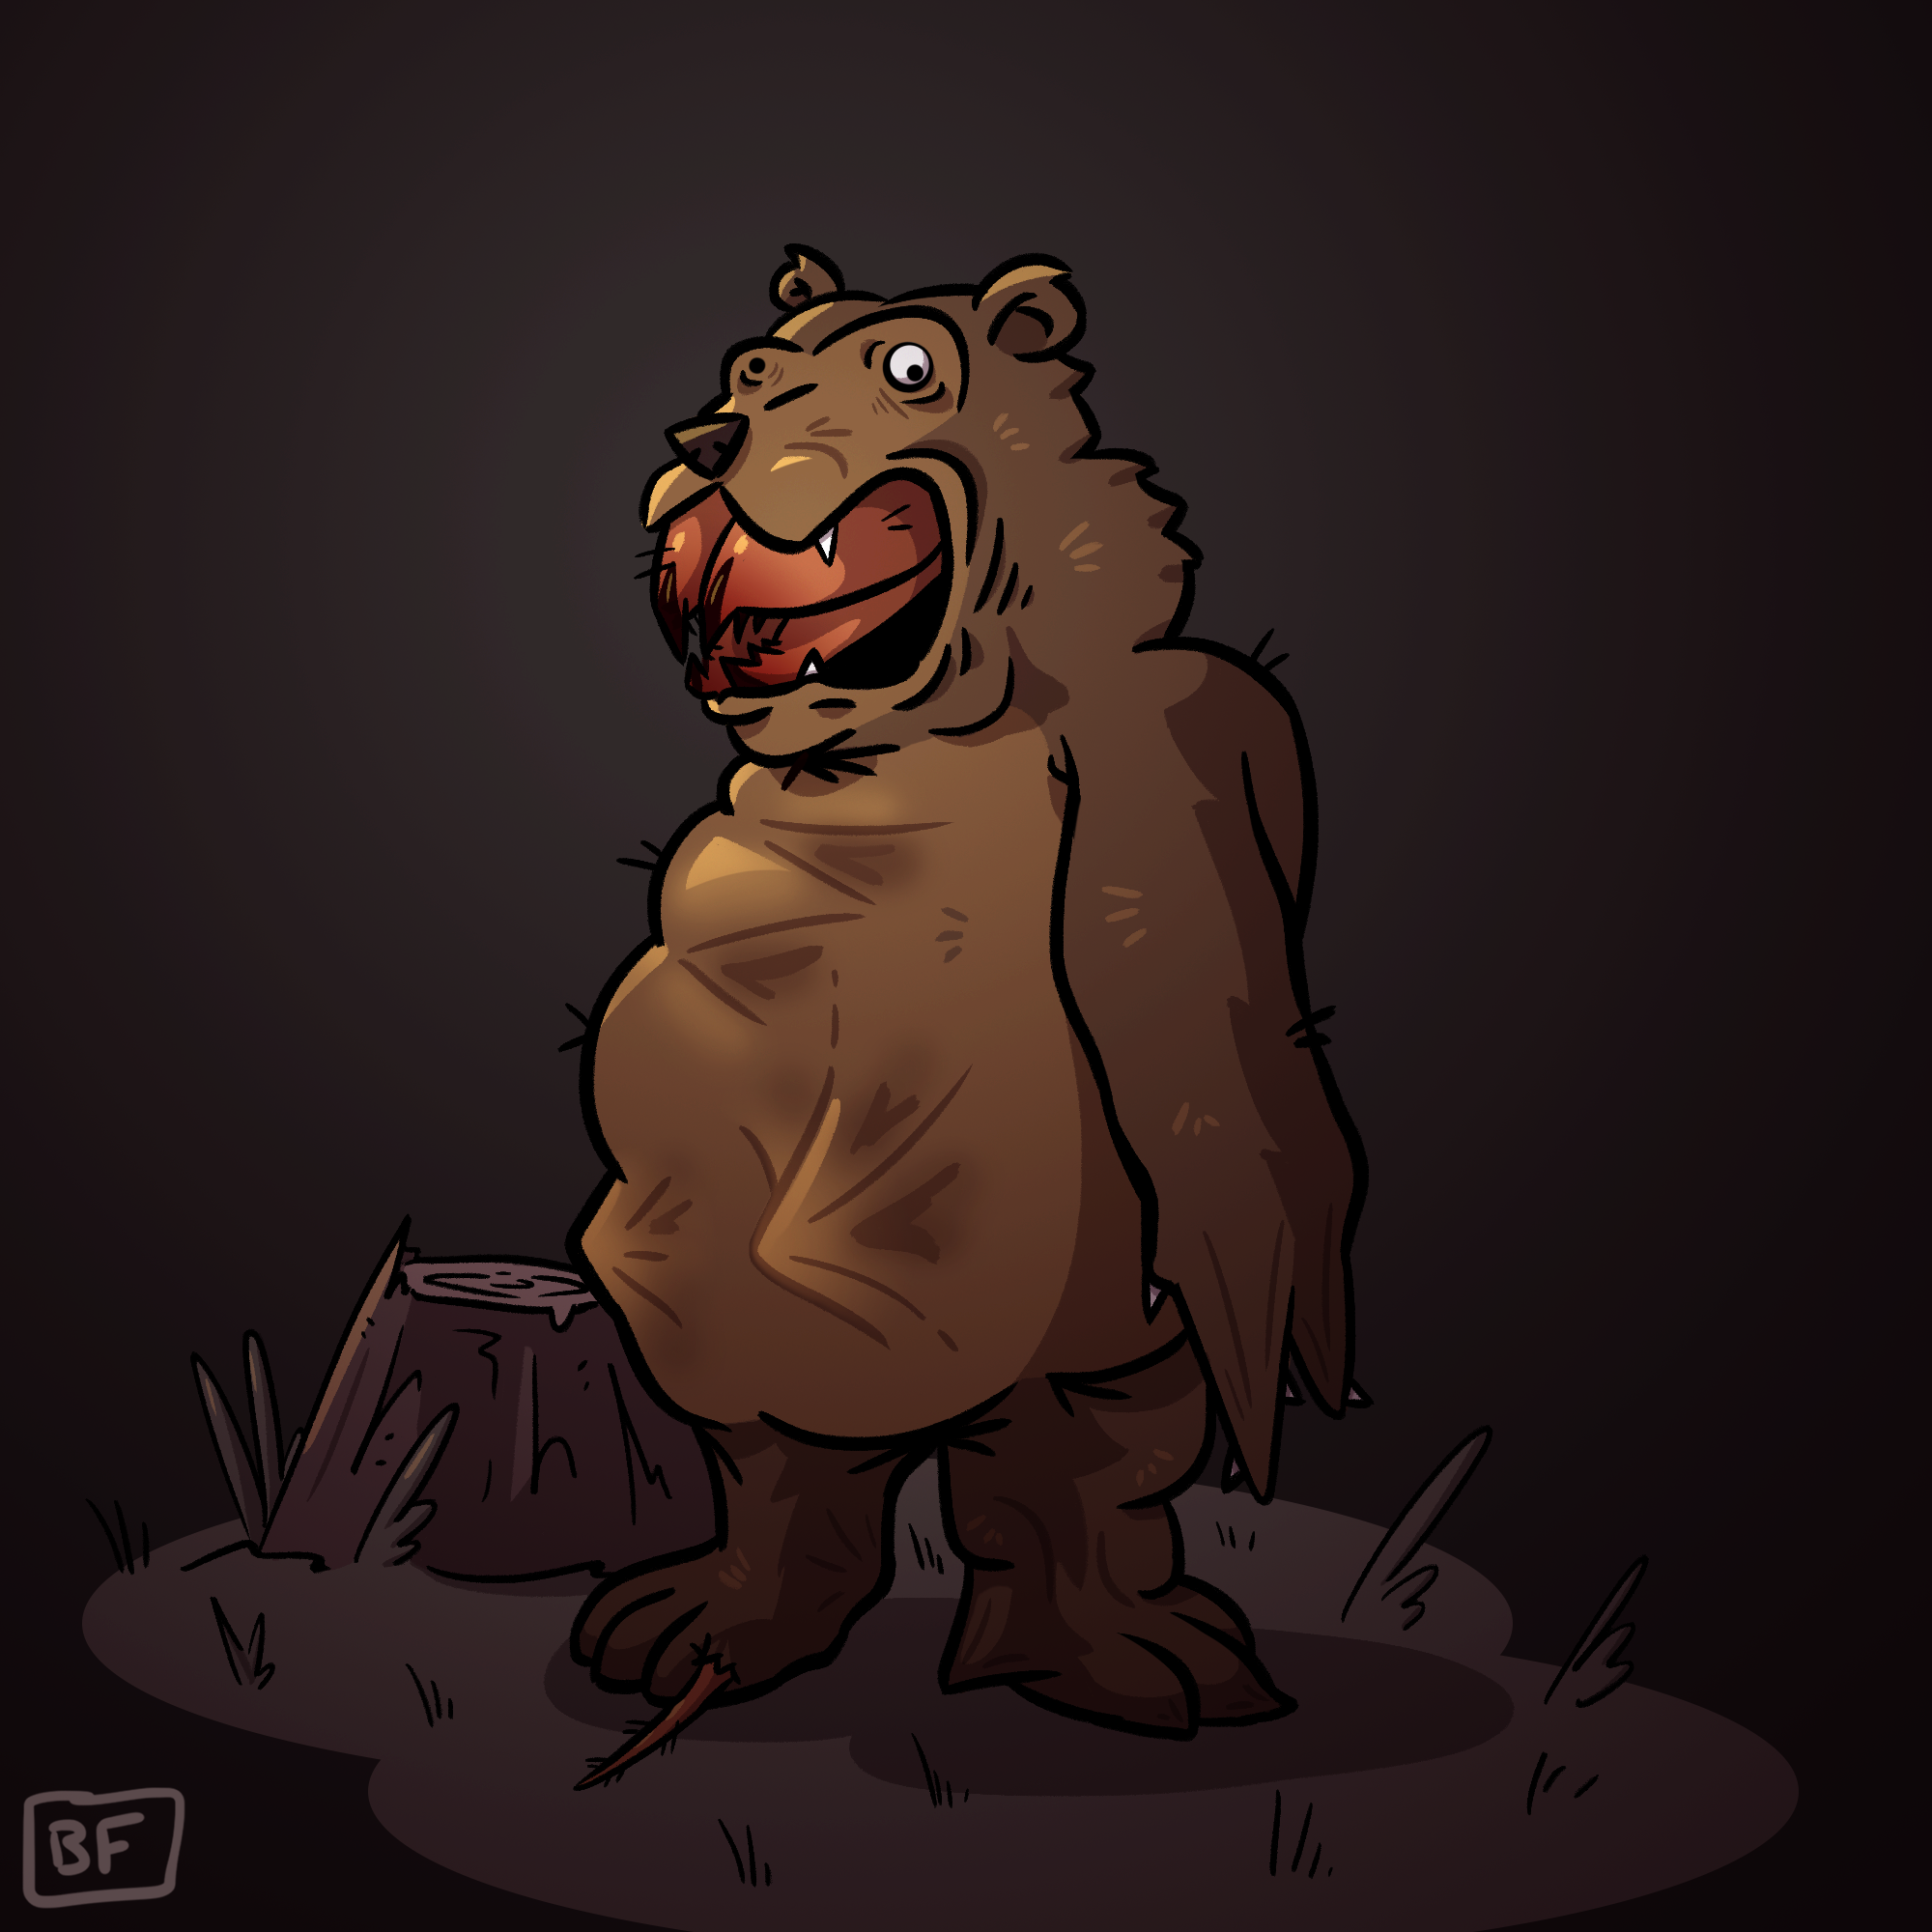 Day 13. Camel Spider in a Bear Costume